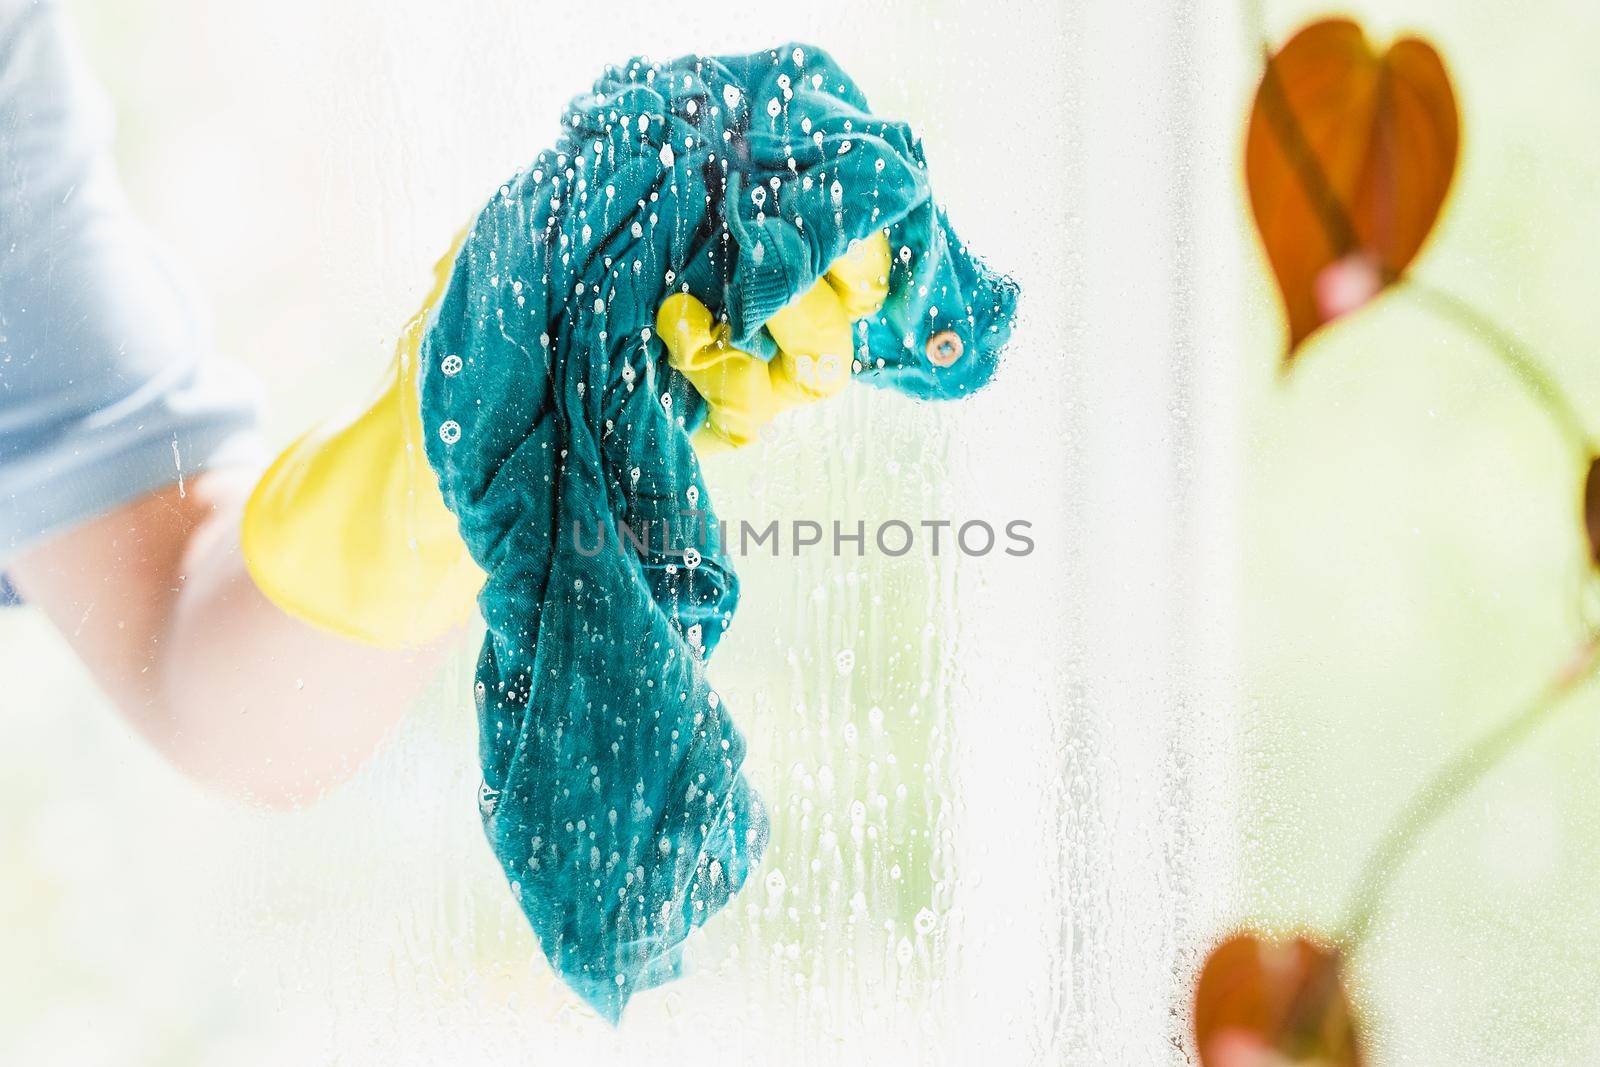 Male hands cleaning house window glass with blue rag. Doing home chores routine